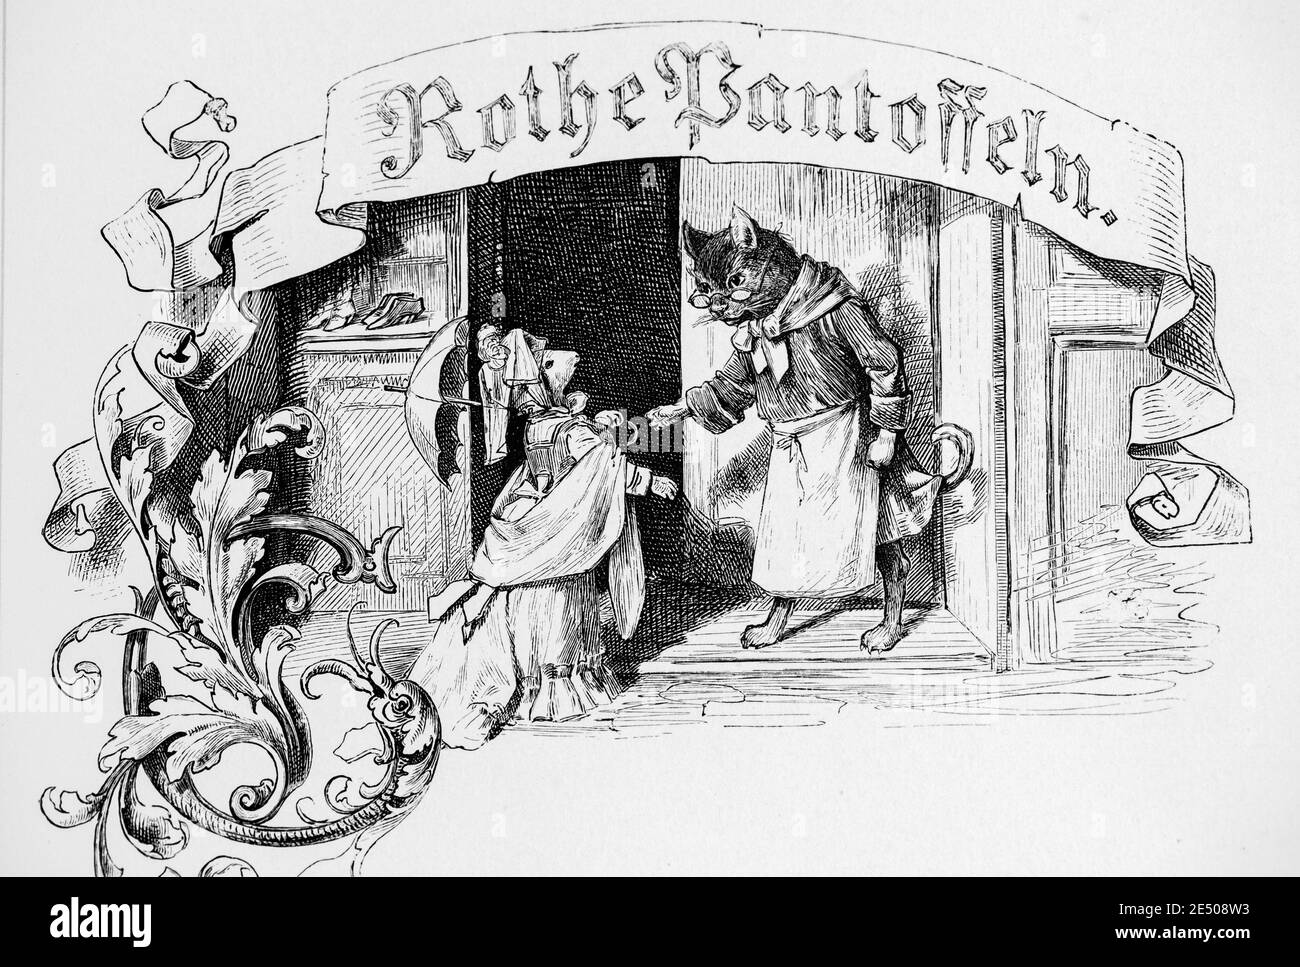 Passief Empirisch Het Illustration to Heine´s poem "Rothe Pantoffeln" or Red Slipper about a  cat´s shoe shop and a customer mouse, poet Heinrich Heine, Romancero, 1880  Stock Photo - Alamy